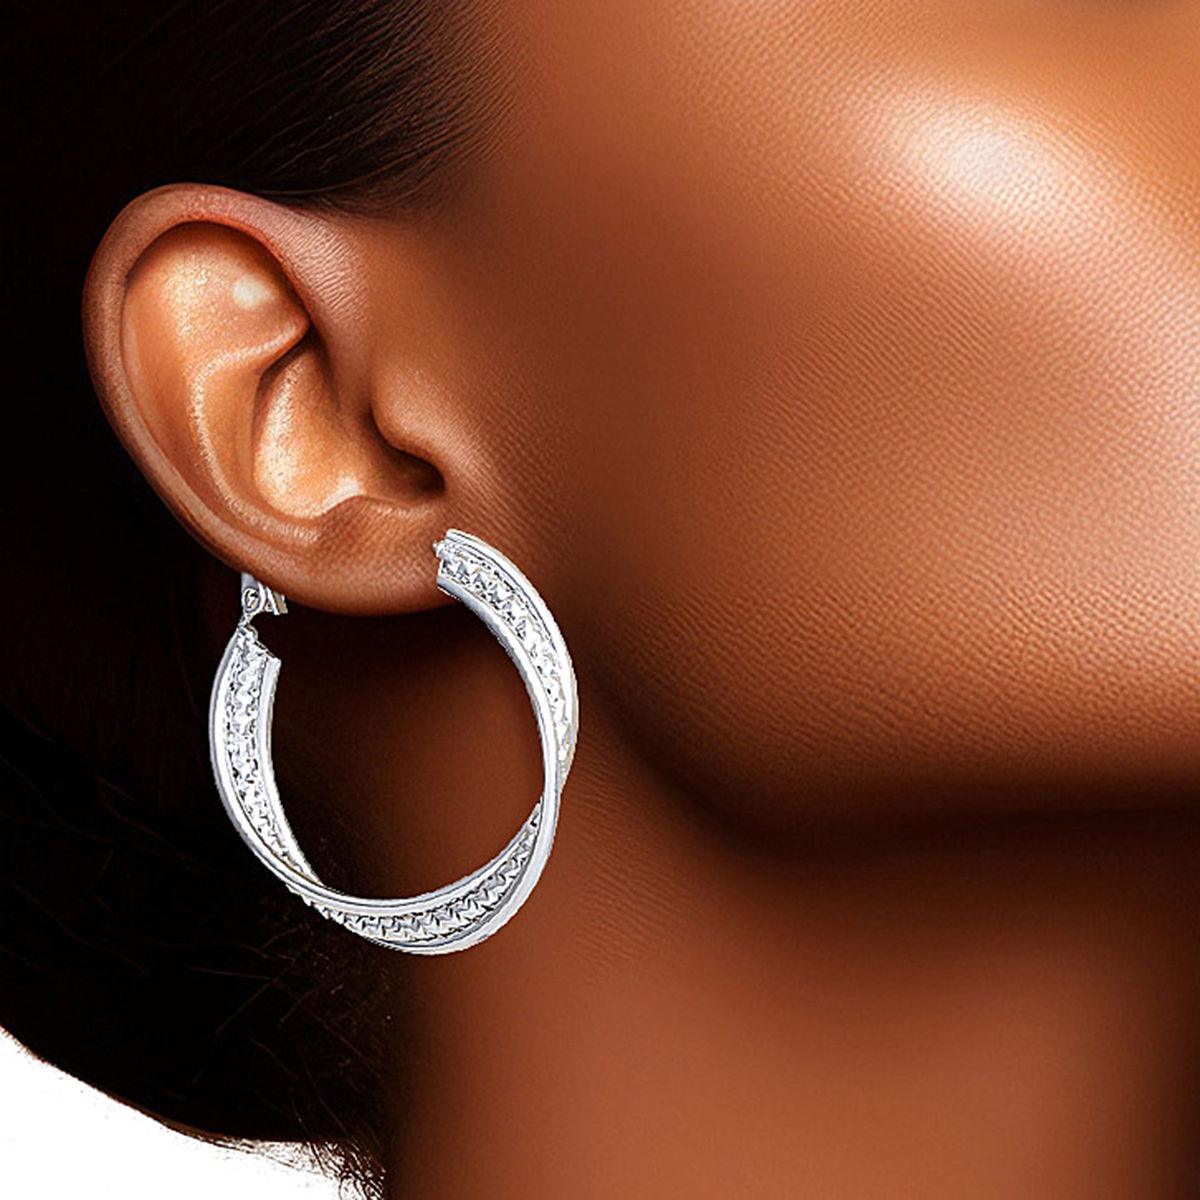 The Perfect Accessory: White Gold Small Diamond-Cut Hoop Earrings - Fashion Jewelry